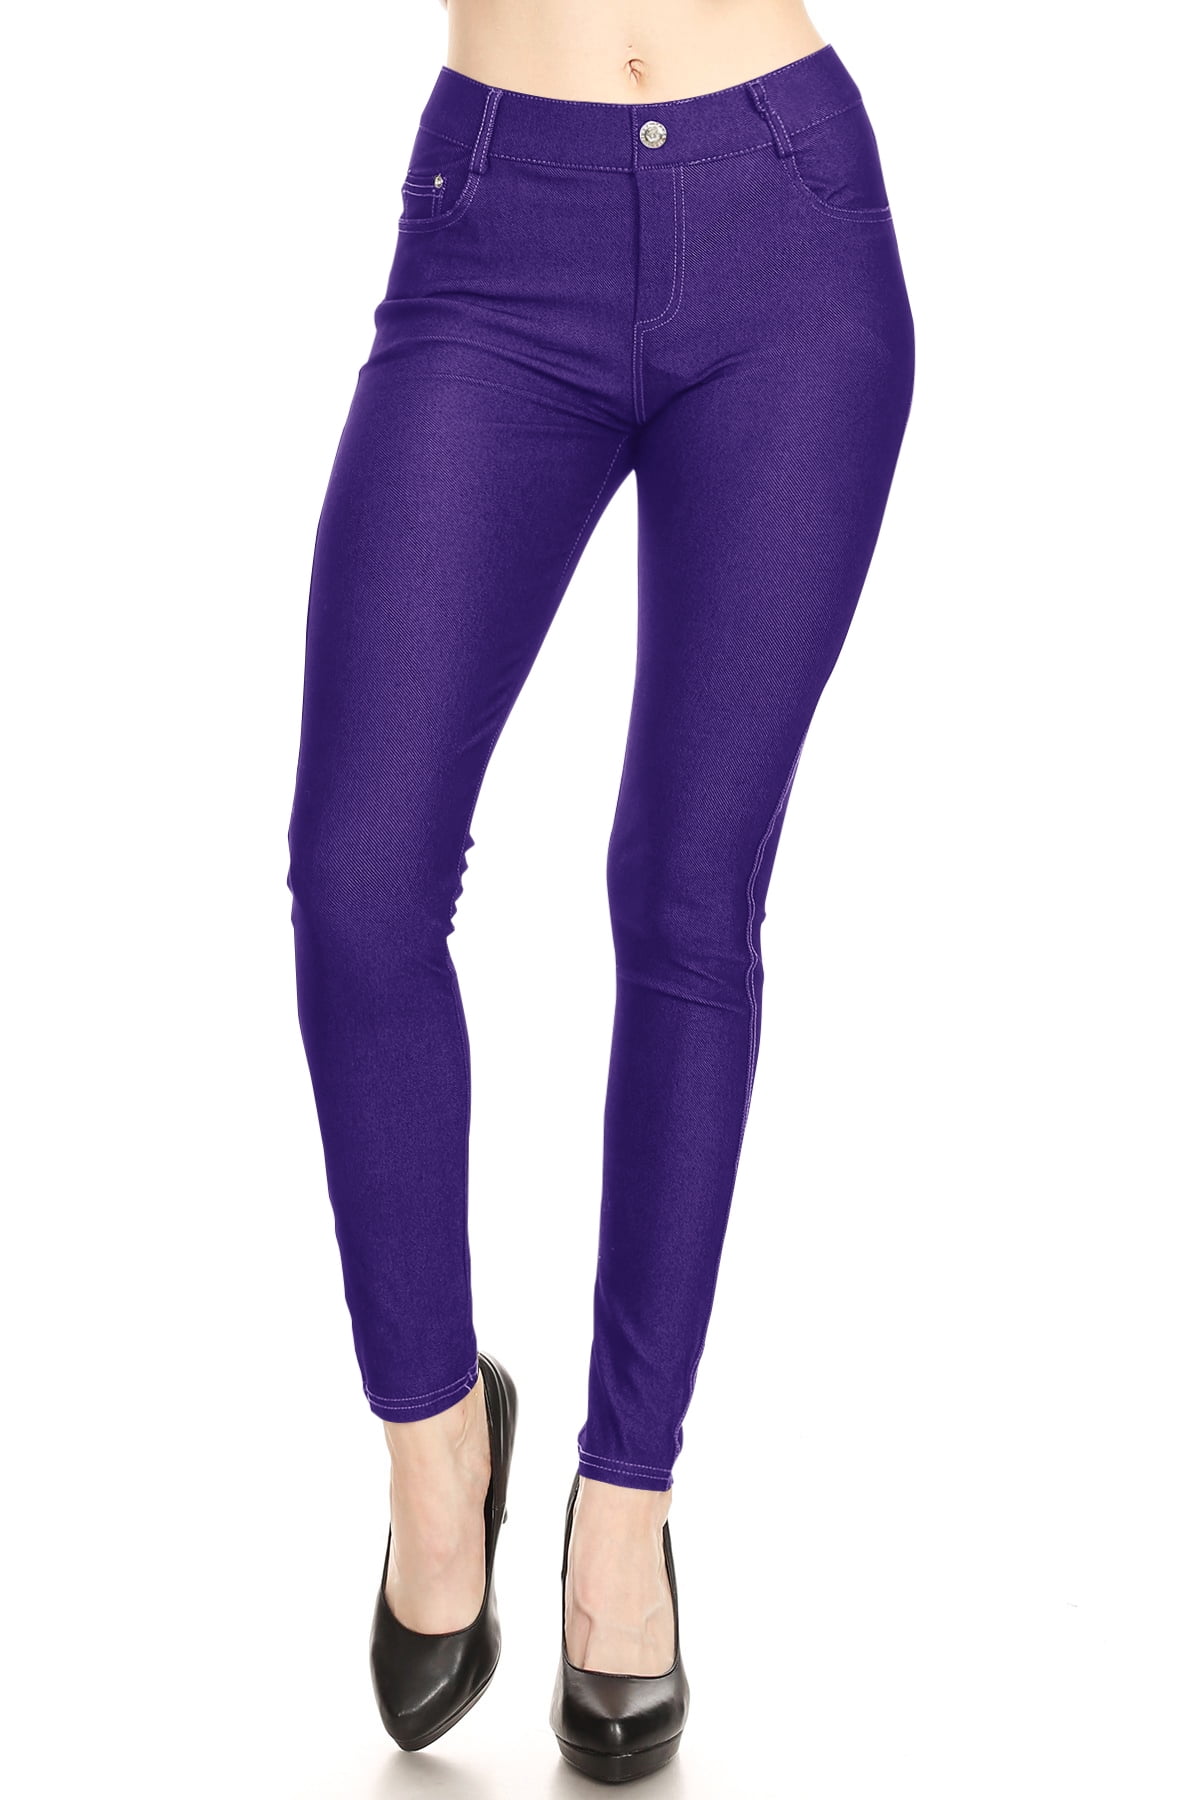 Moa Collection Women's Stretch Jeggings with Pockets Slimming Pull